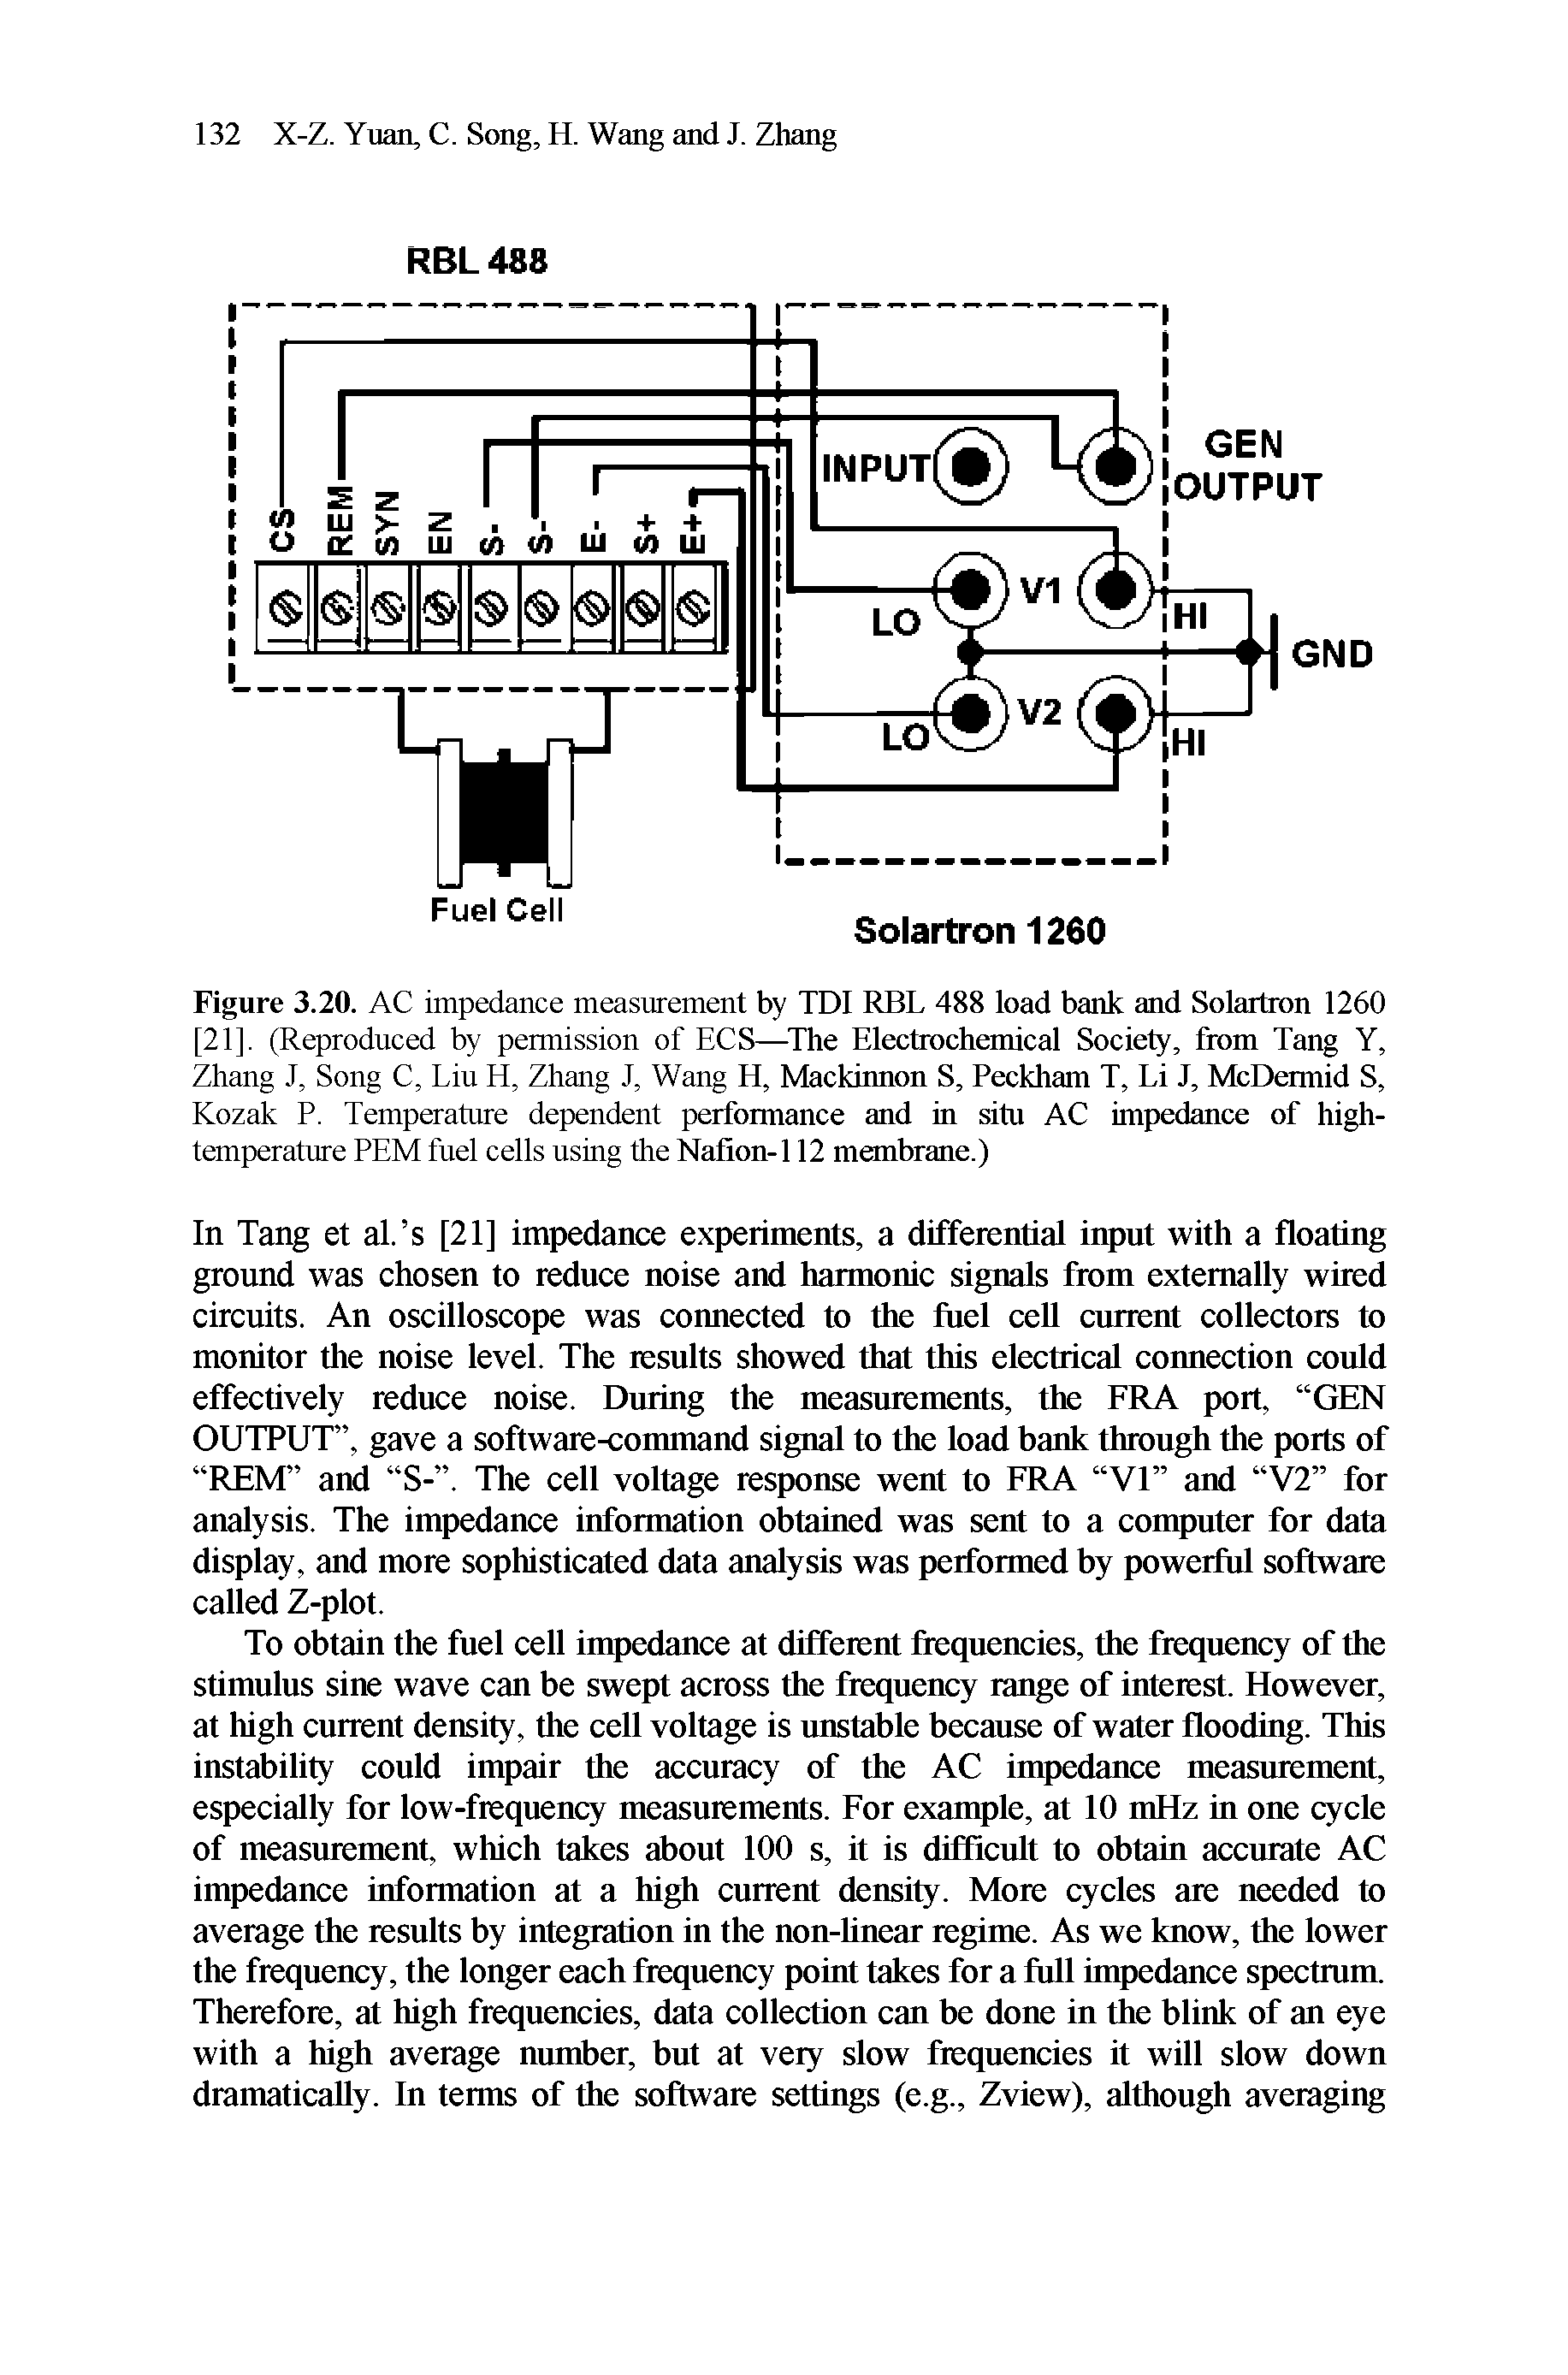 Figure 3.20. AC impedance measurement by TDI RBL 488 load bank and Solartron 1260 [21]. (Reproduced by permission of ECS—The Electrochemical Society, from Tang Y, Zhang J, Song C, Liu H, Zhang J, Wang H, Mackinnon S, Peckham T, Li J, McDermid S, Kozak P. Temperature dependent performance and in situ AC impedance of high-temperature PEM fuel cells using the Nafion-112 membrane.)...